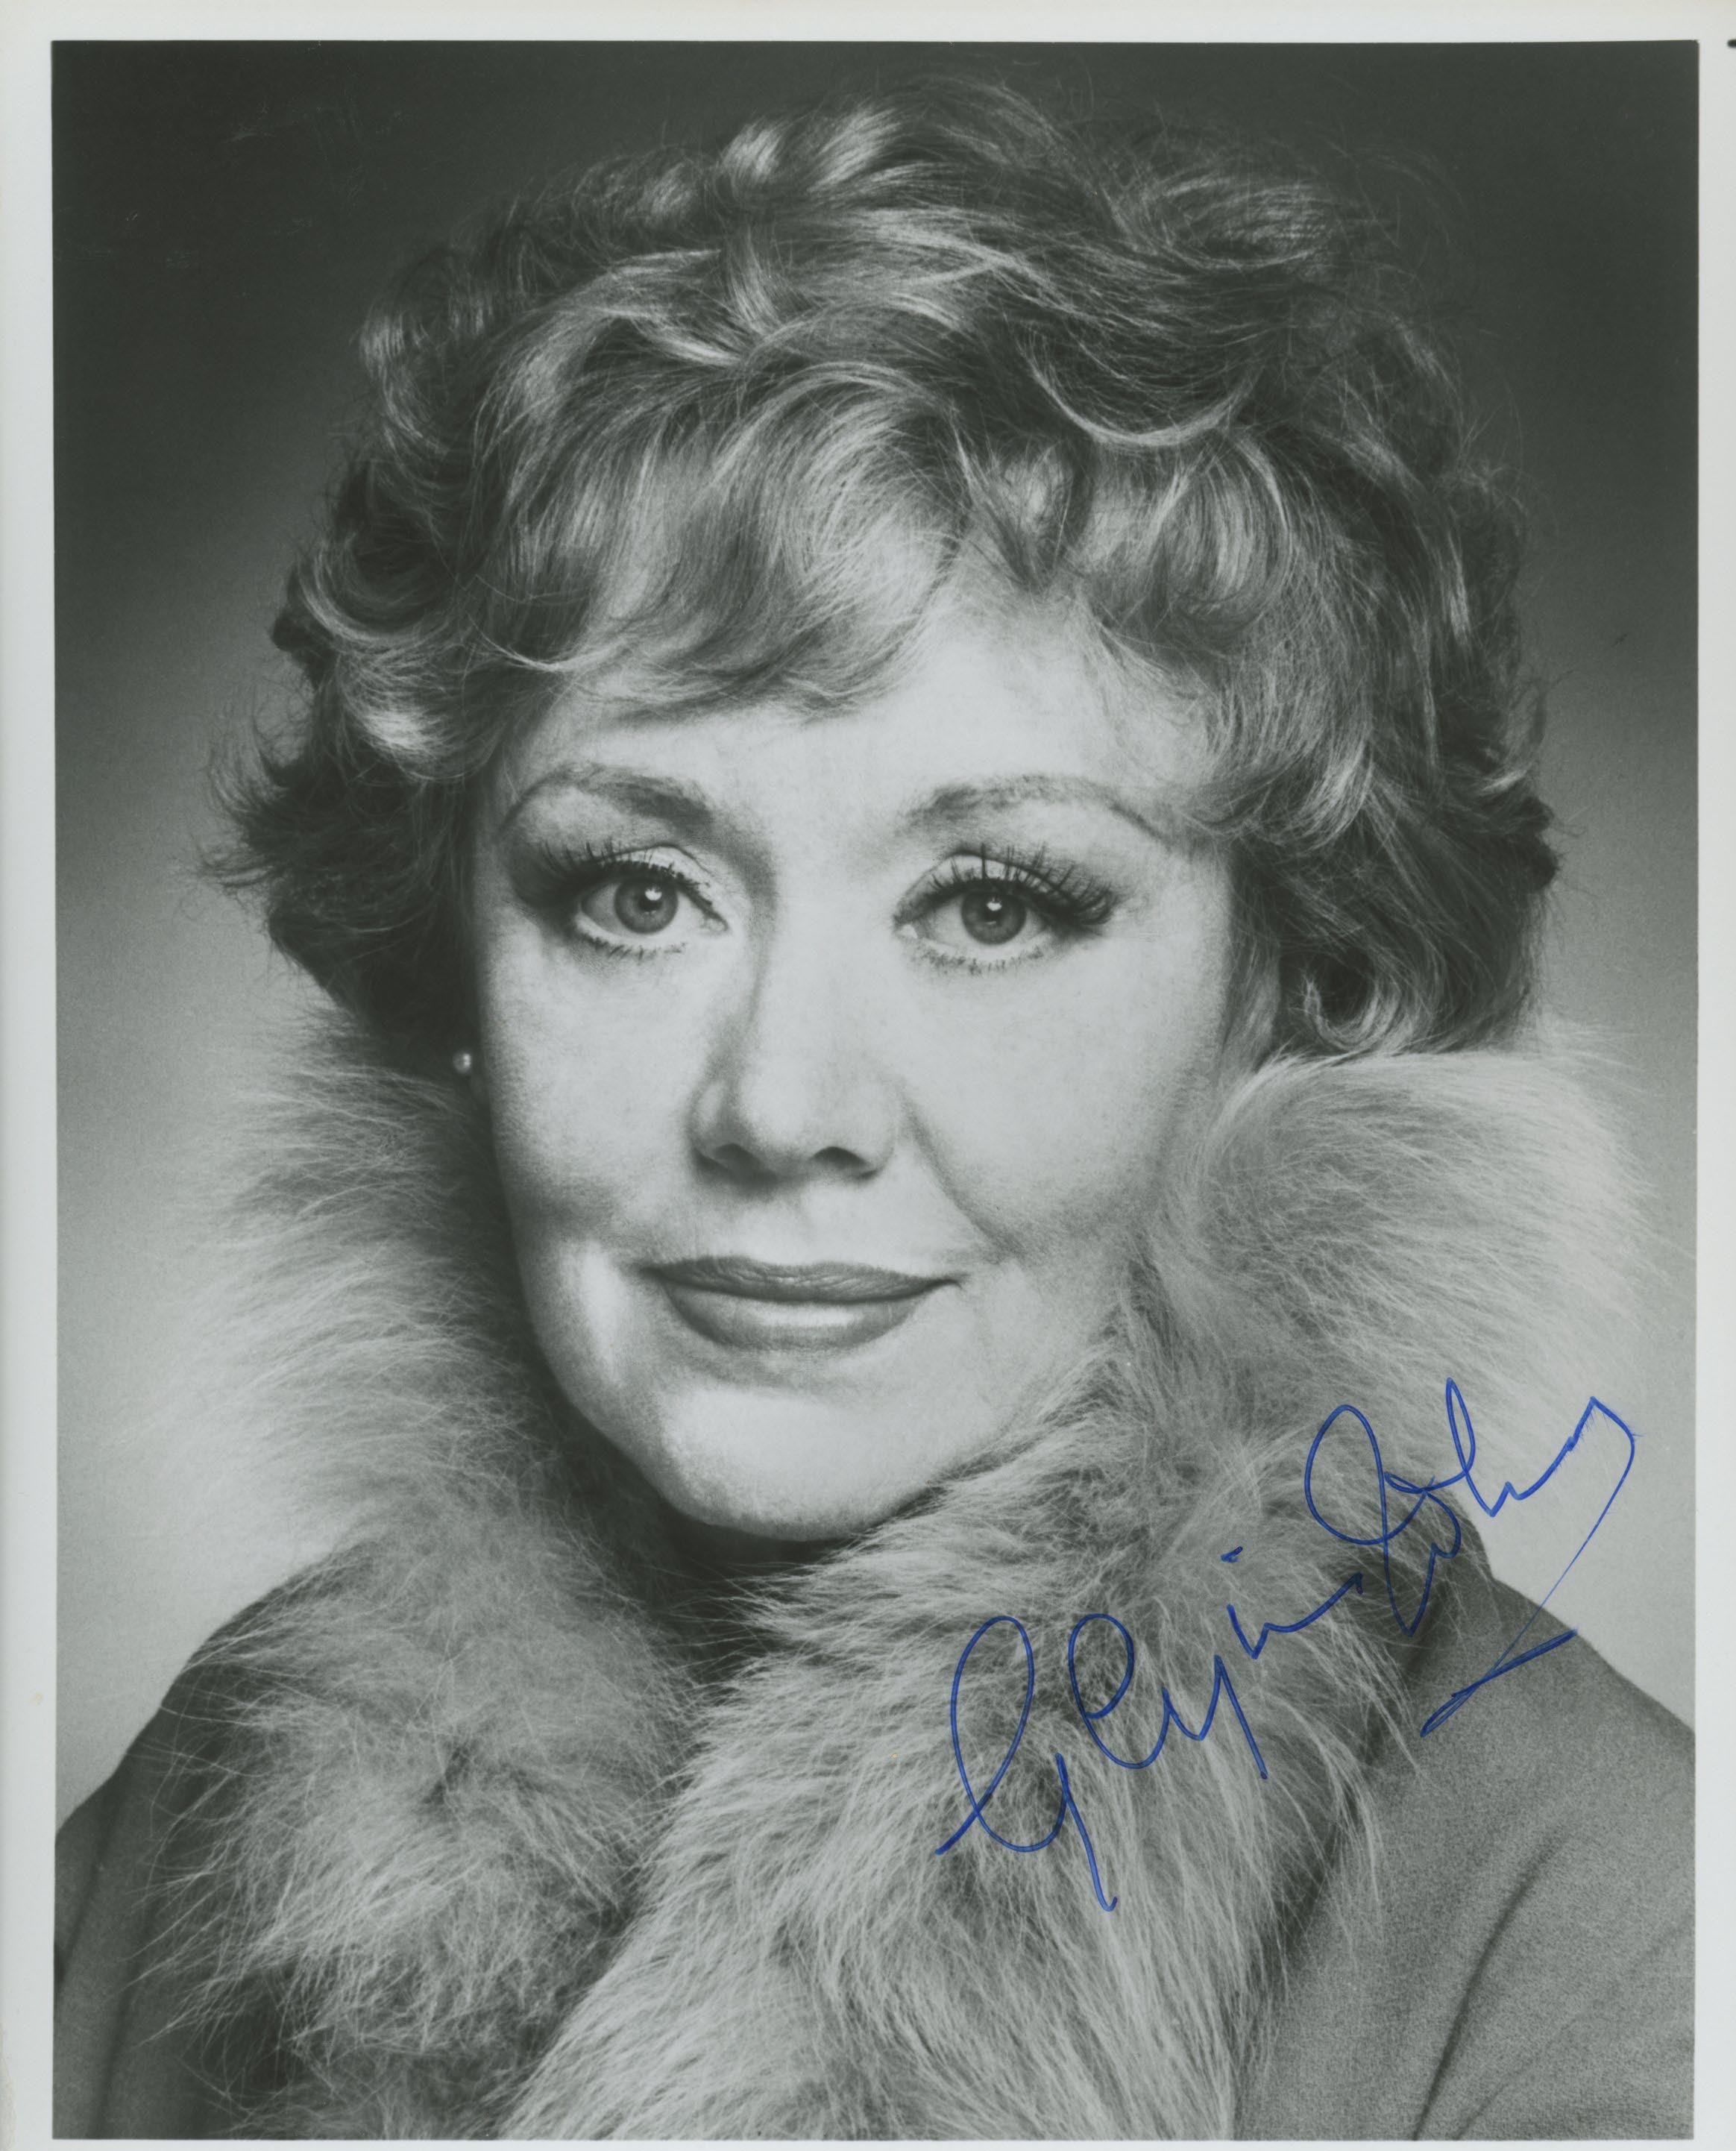 Glynis Johns signed photo